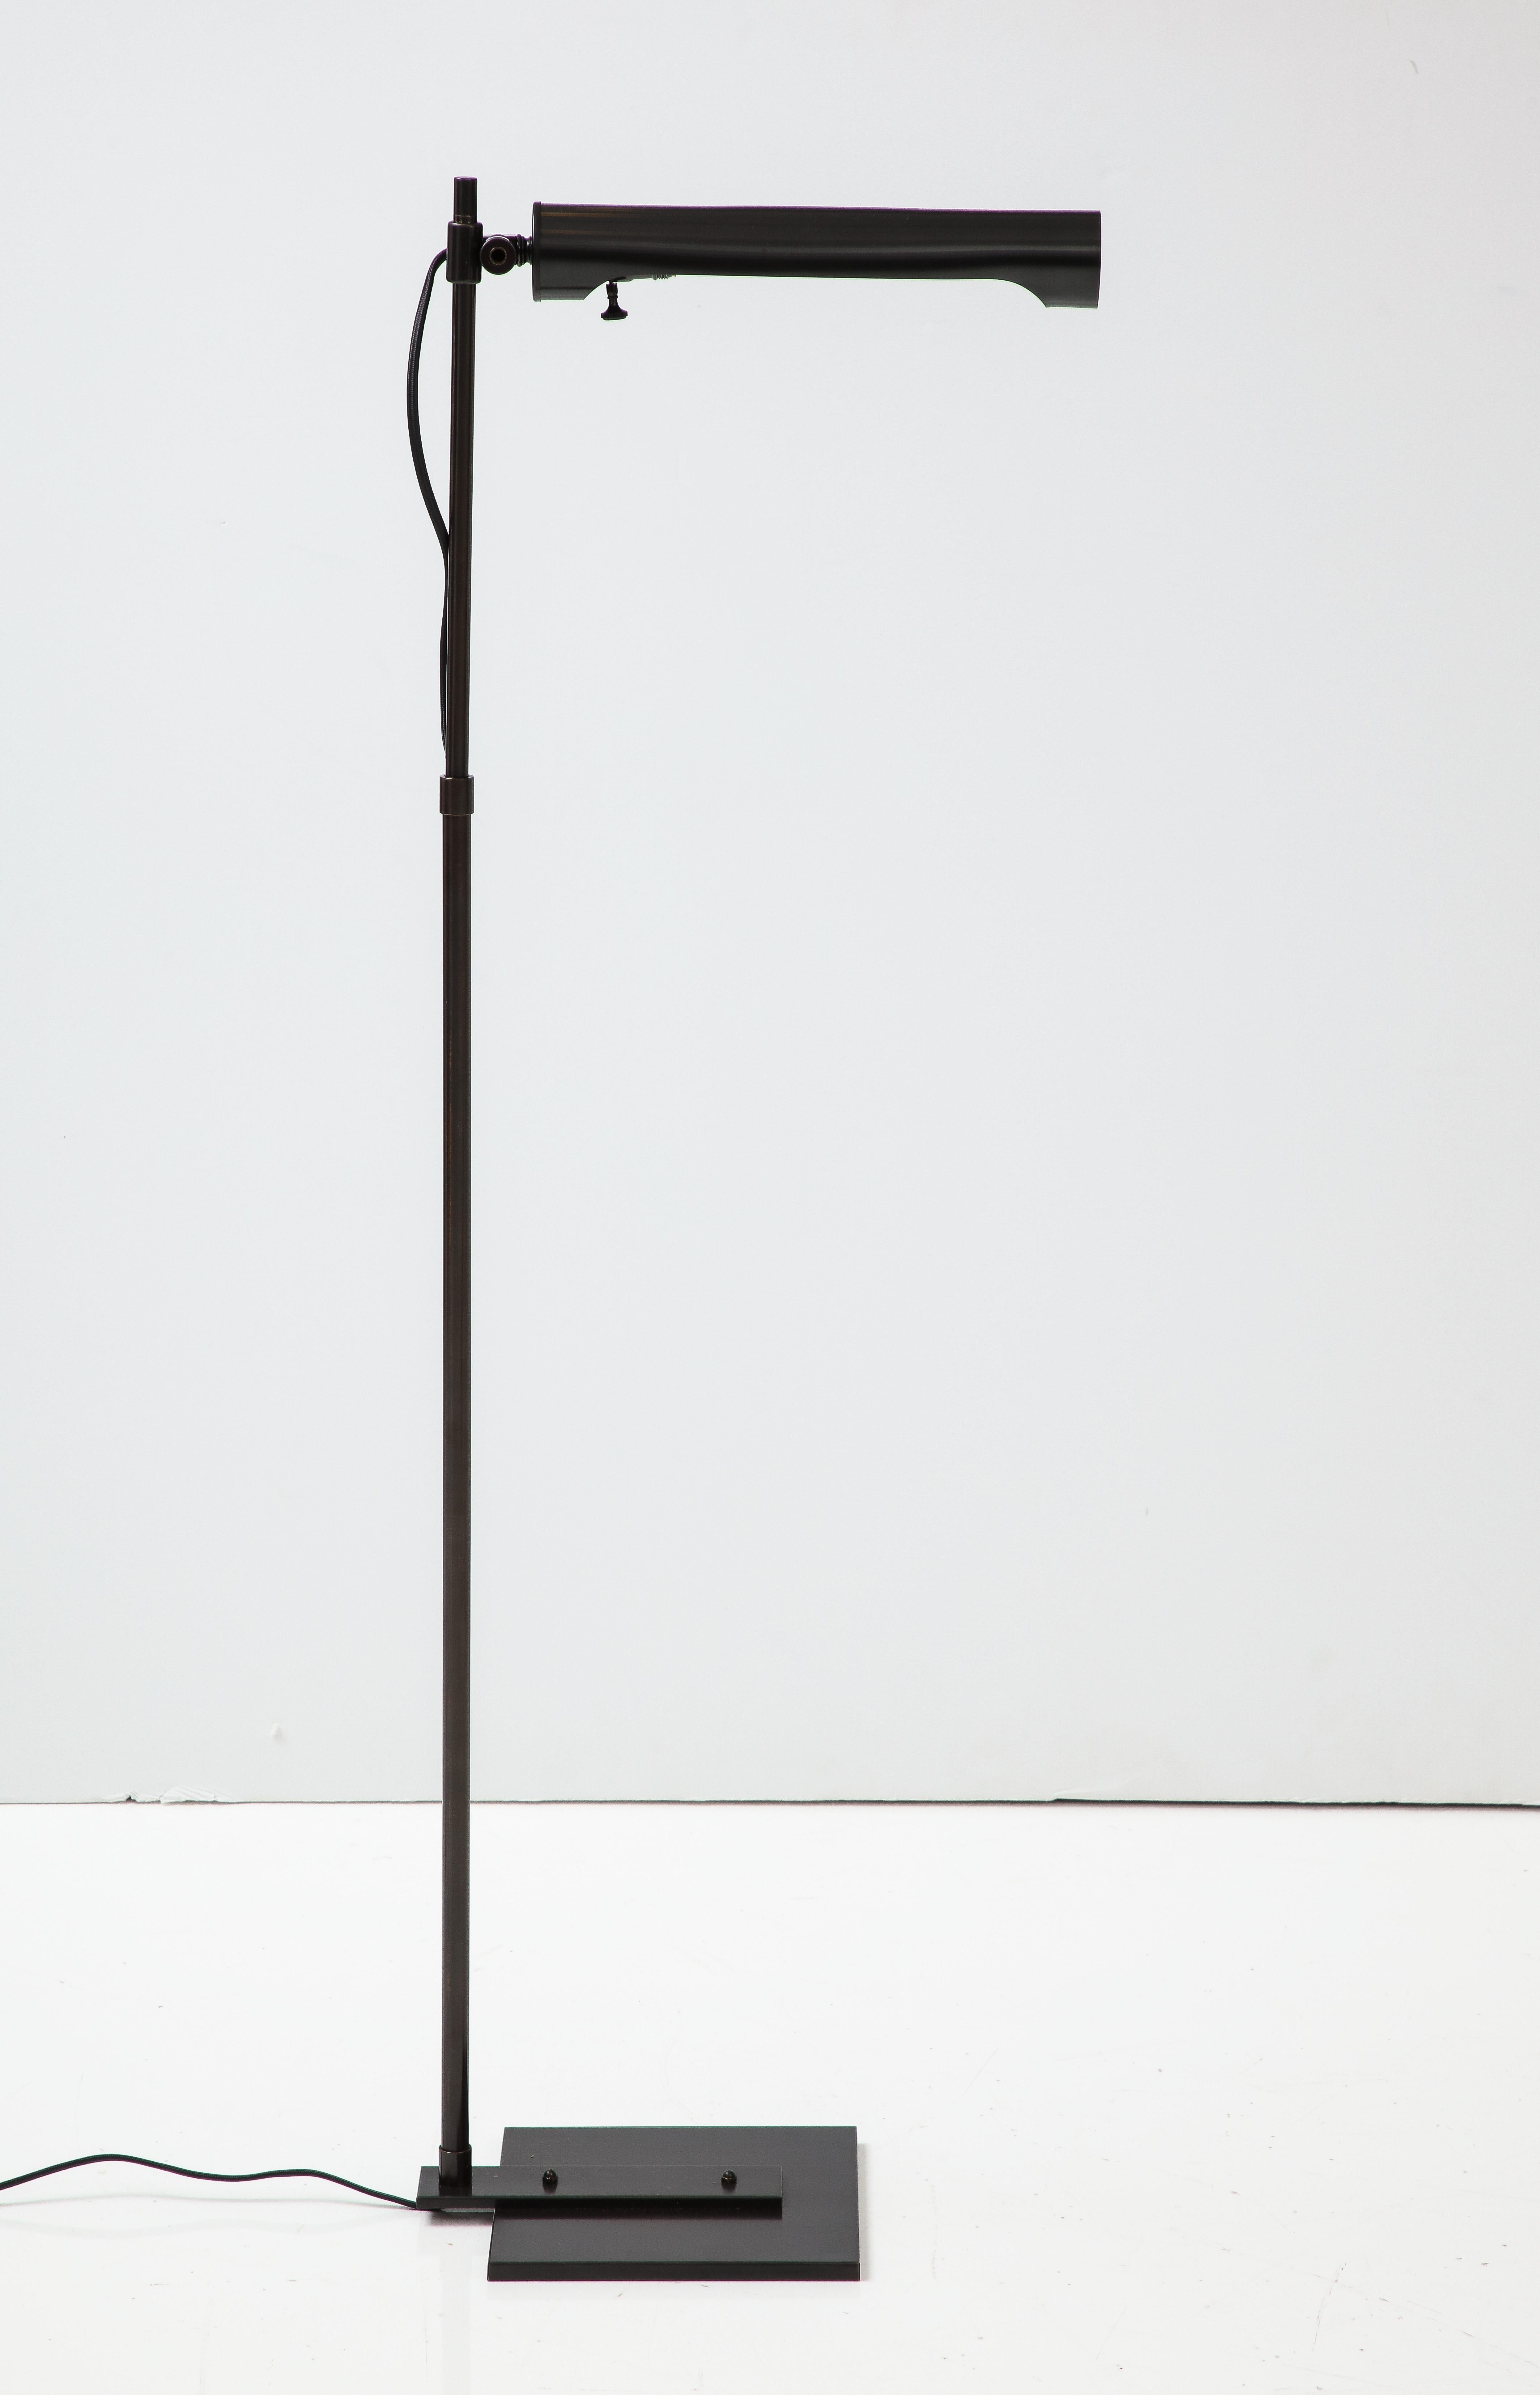 Architectural adjustable dark bronze floor lamp featuring a tubular shade and square base. Rewired for use in the USA using black silk cord.